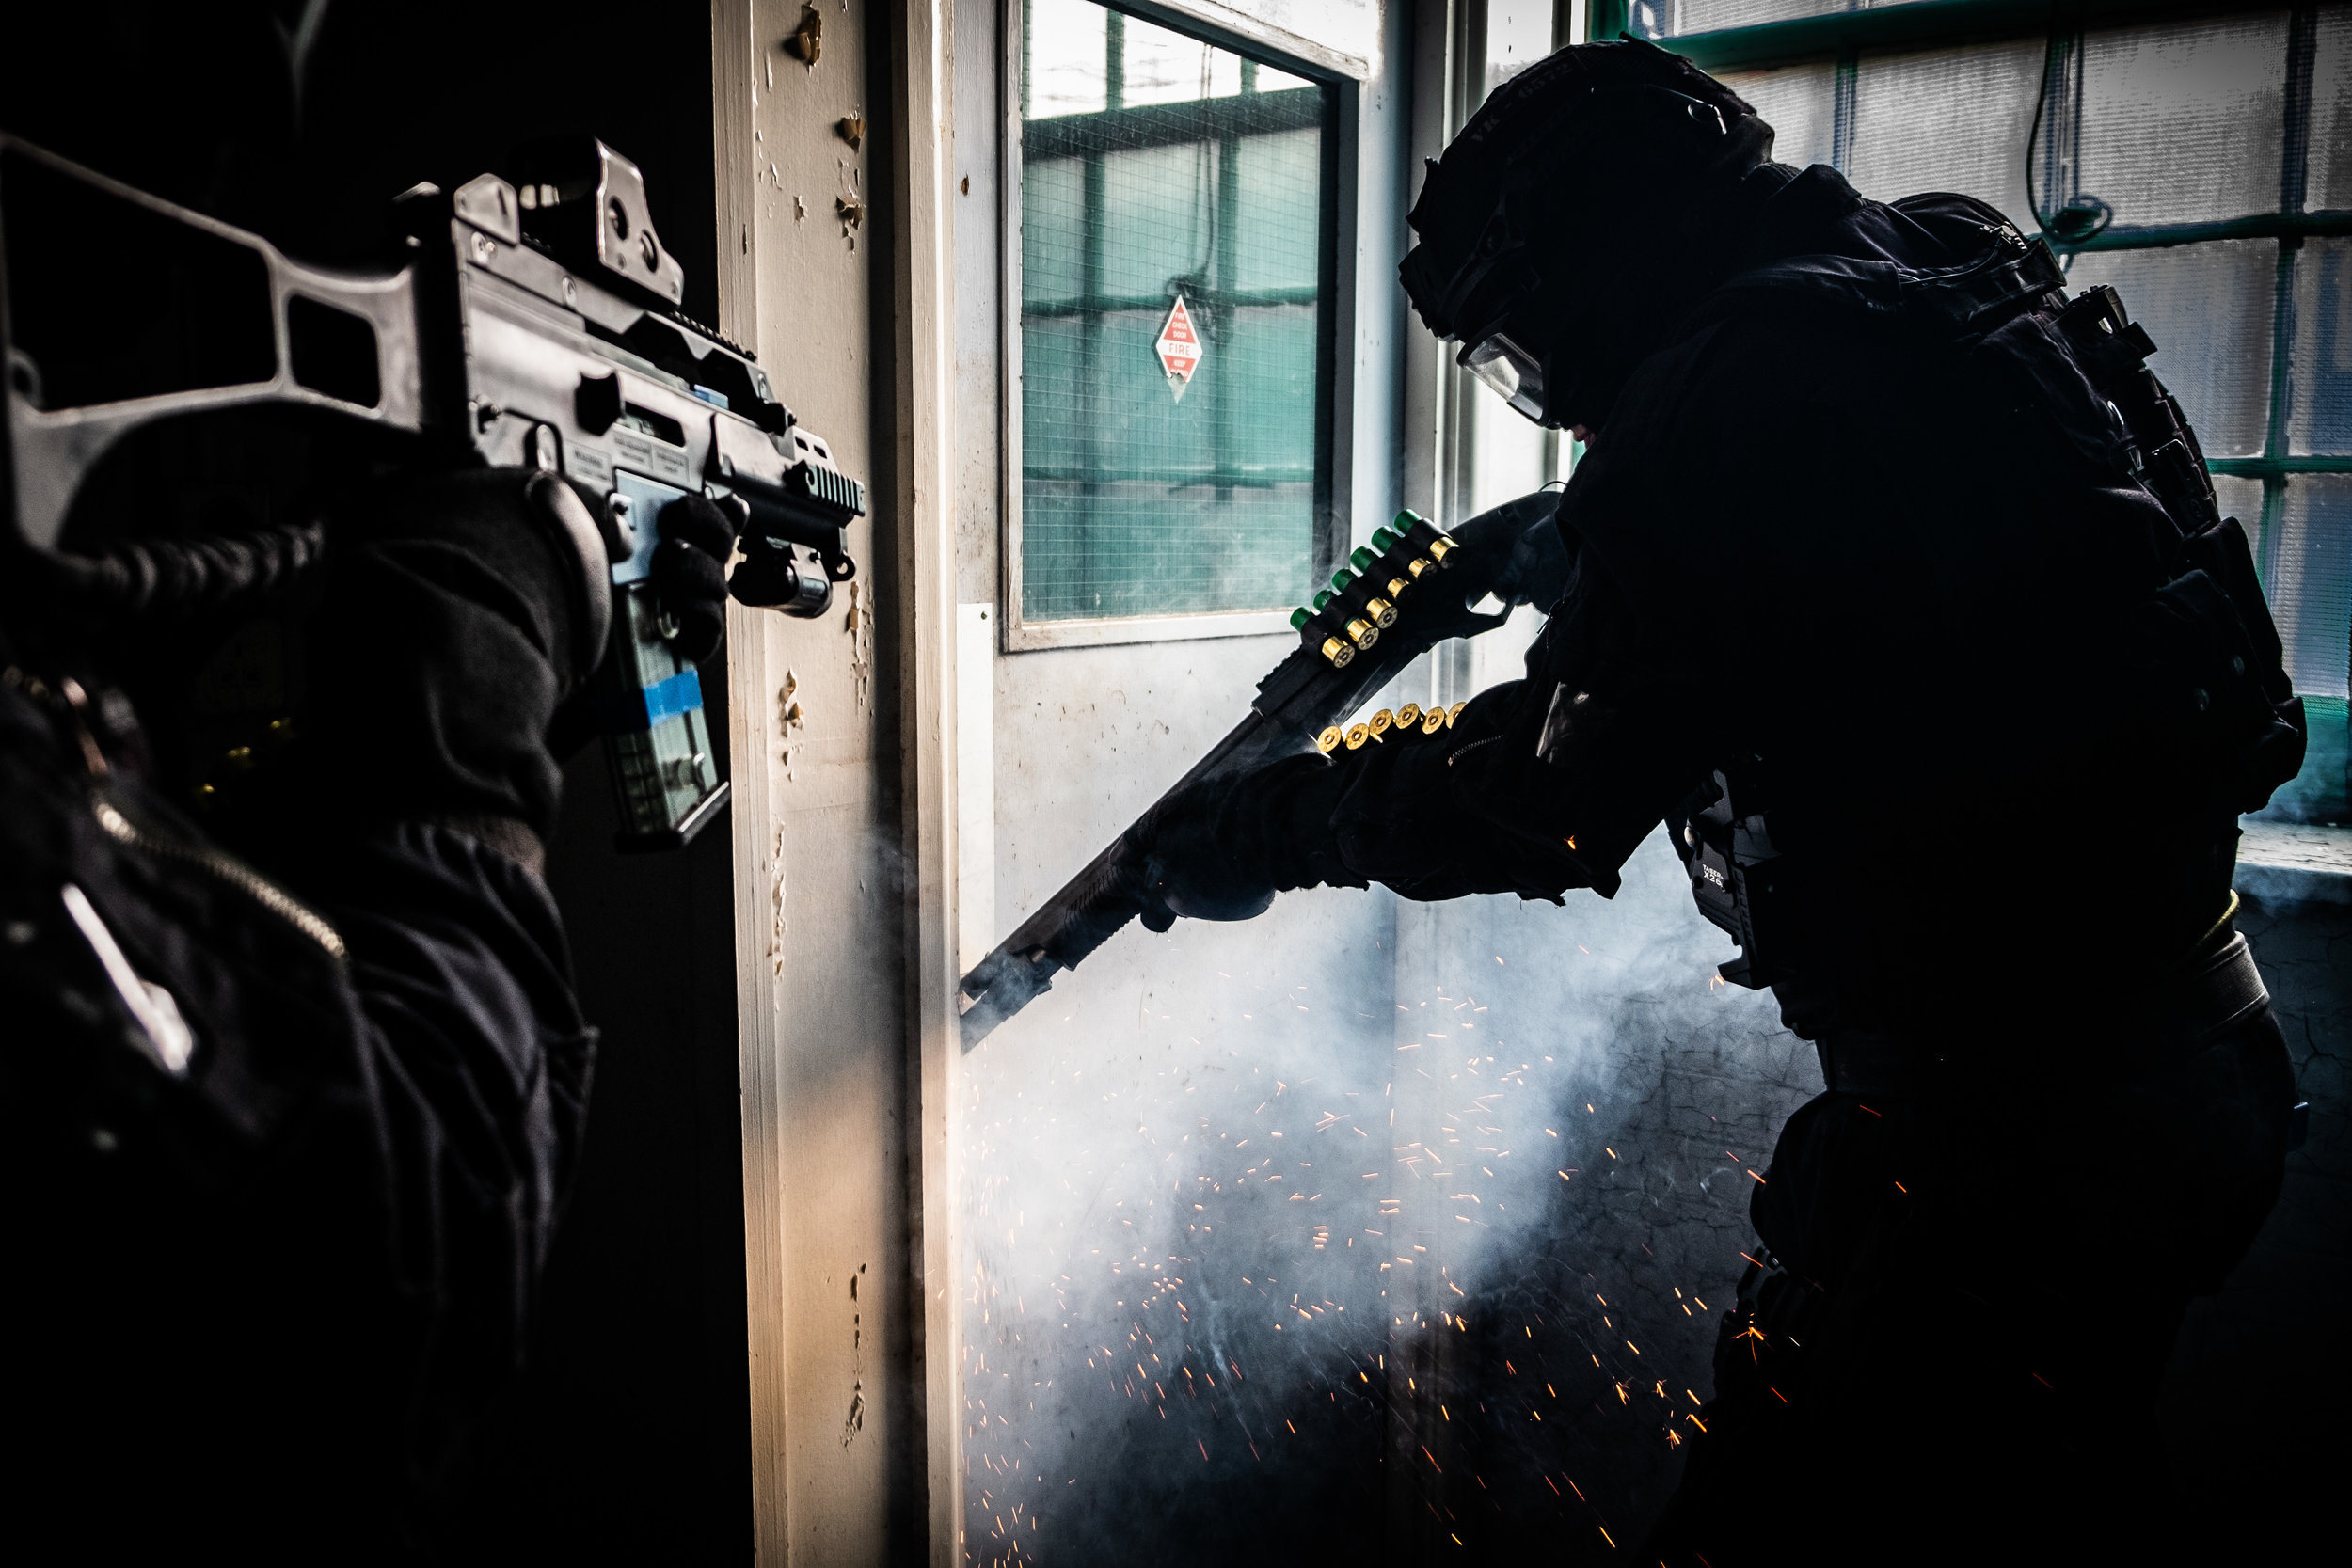  Armed police practice entry techniques by shooting the locks and hinges from doors. 
Photo by Jason Bye, 15 November 2018
 